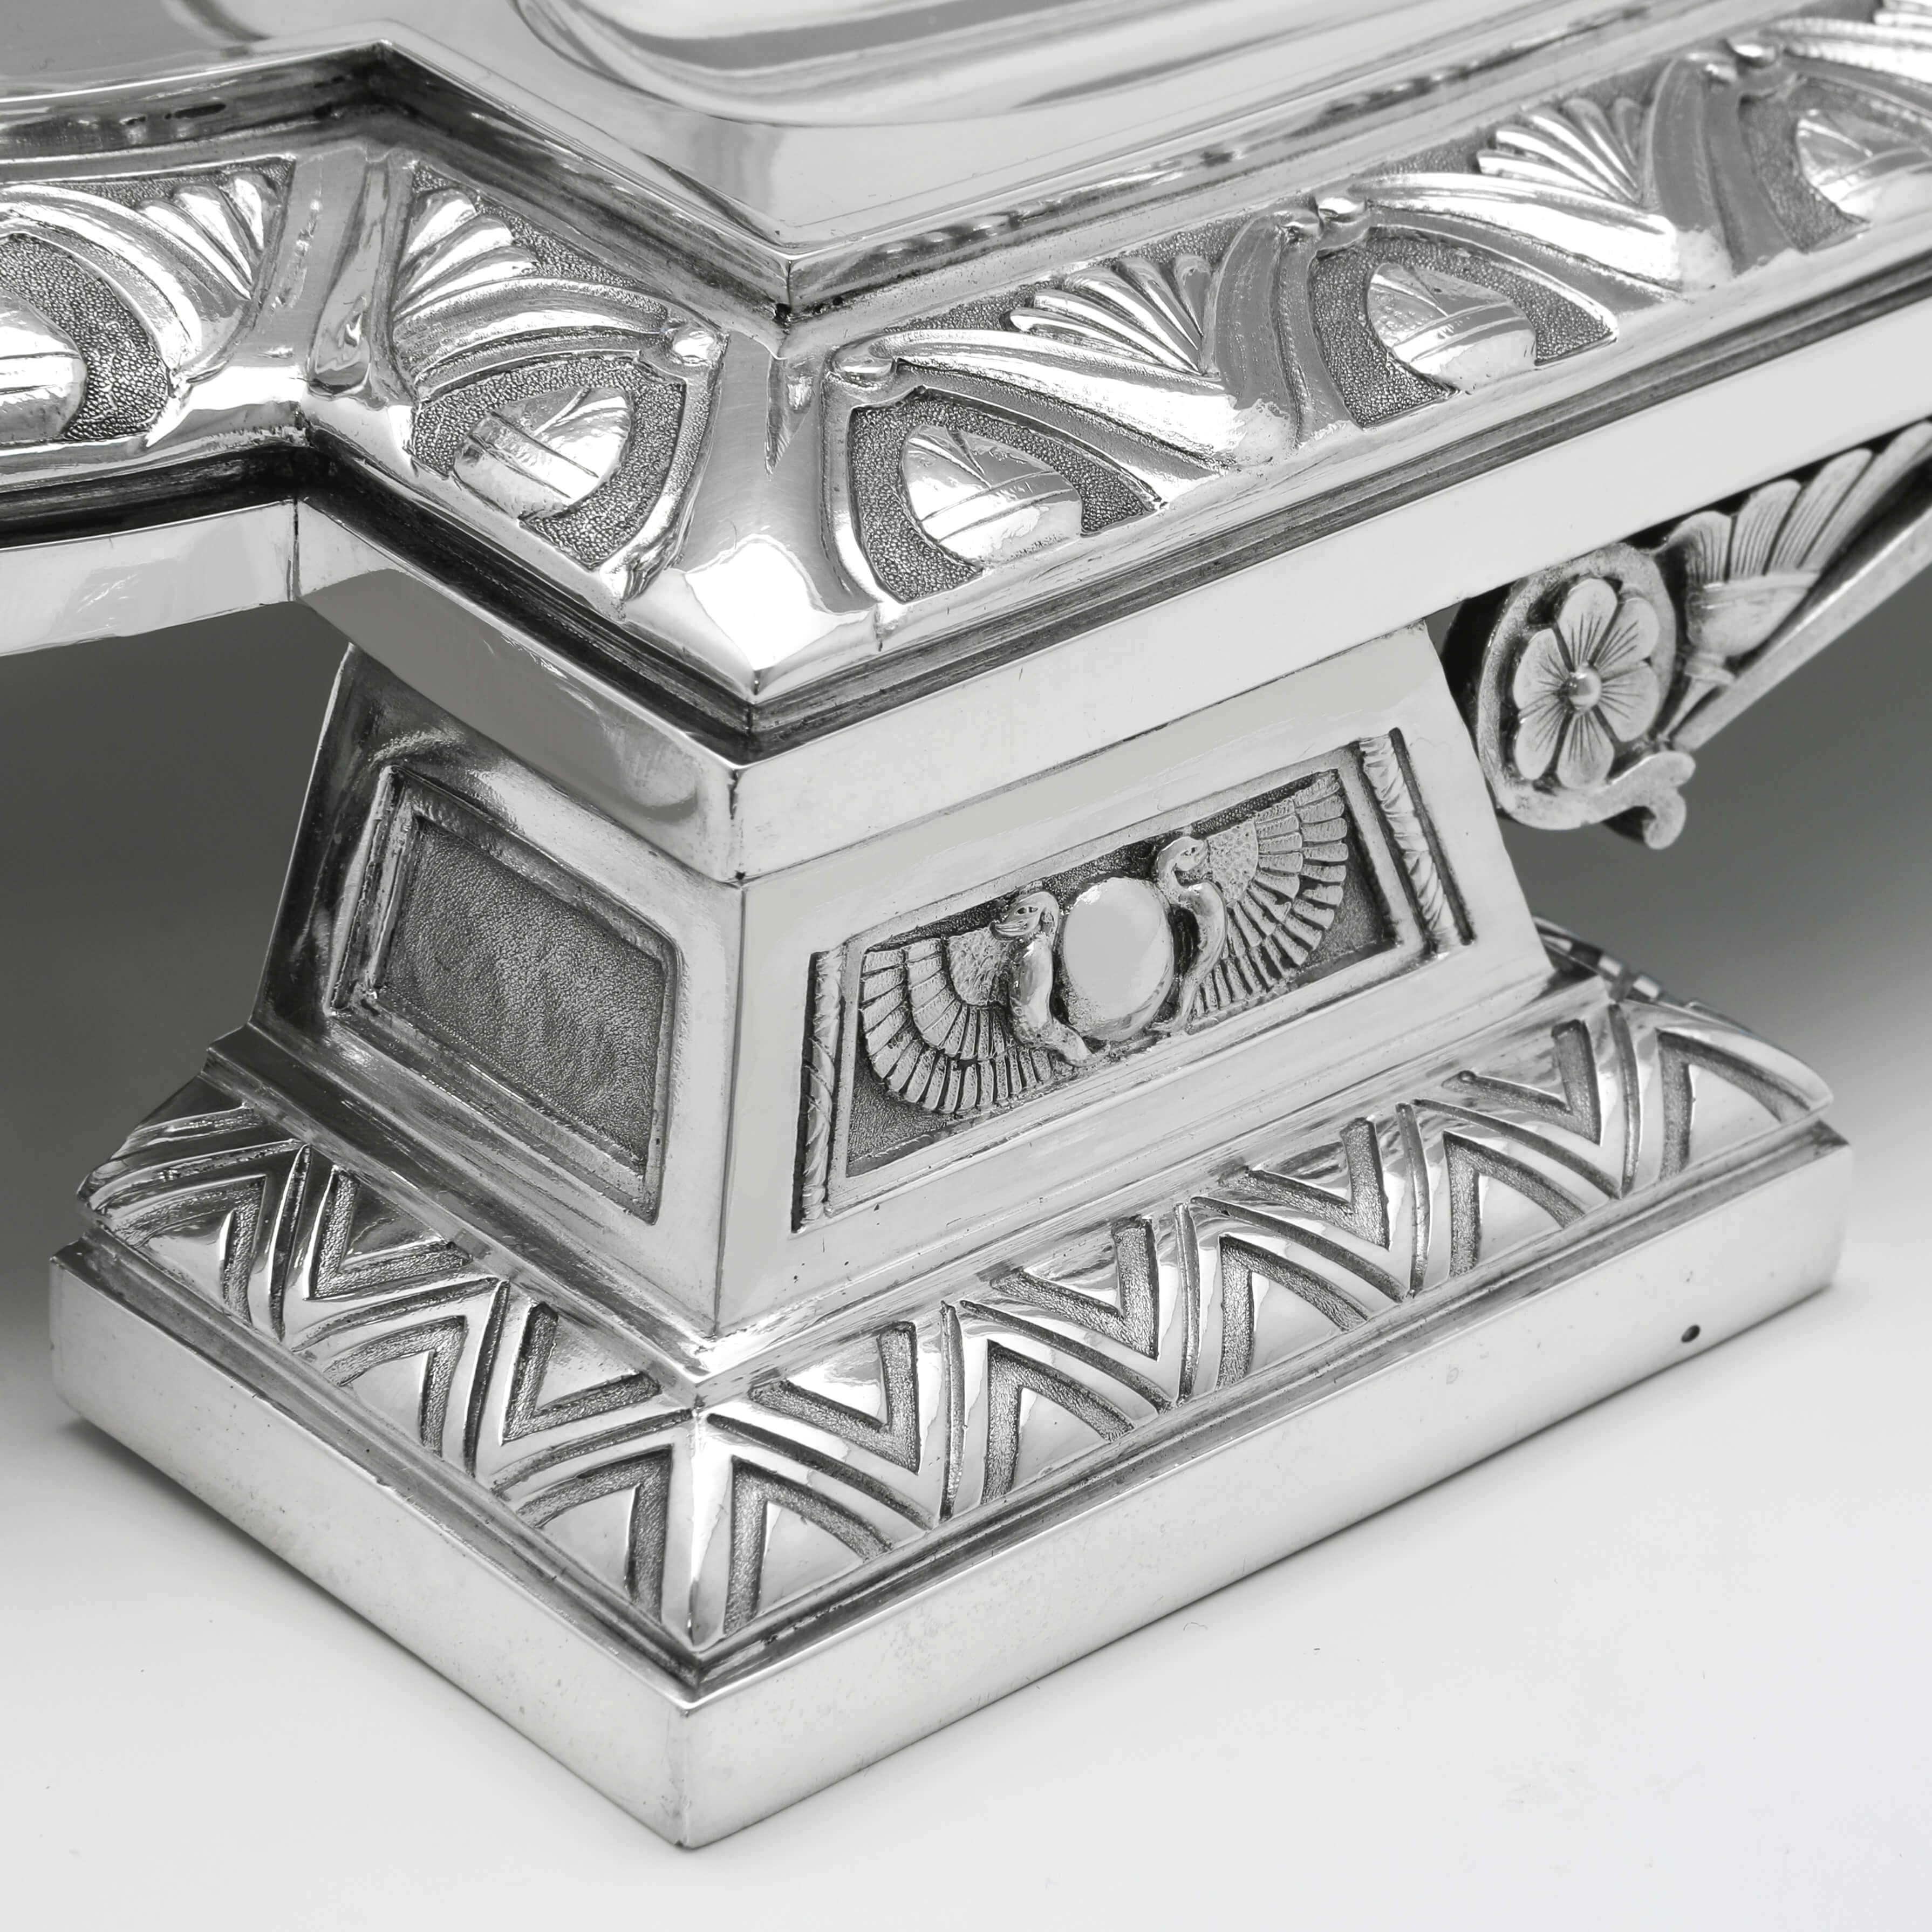 Hallmarked in London in 1908 by Garrard & Co., this monumental Antique, Sterling Silver Ink Stand, is the epitome of Egyptian Revival taste, richly decorated with geometric patterns and Egyptian Motifs throughout. The central storage box is topped